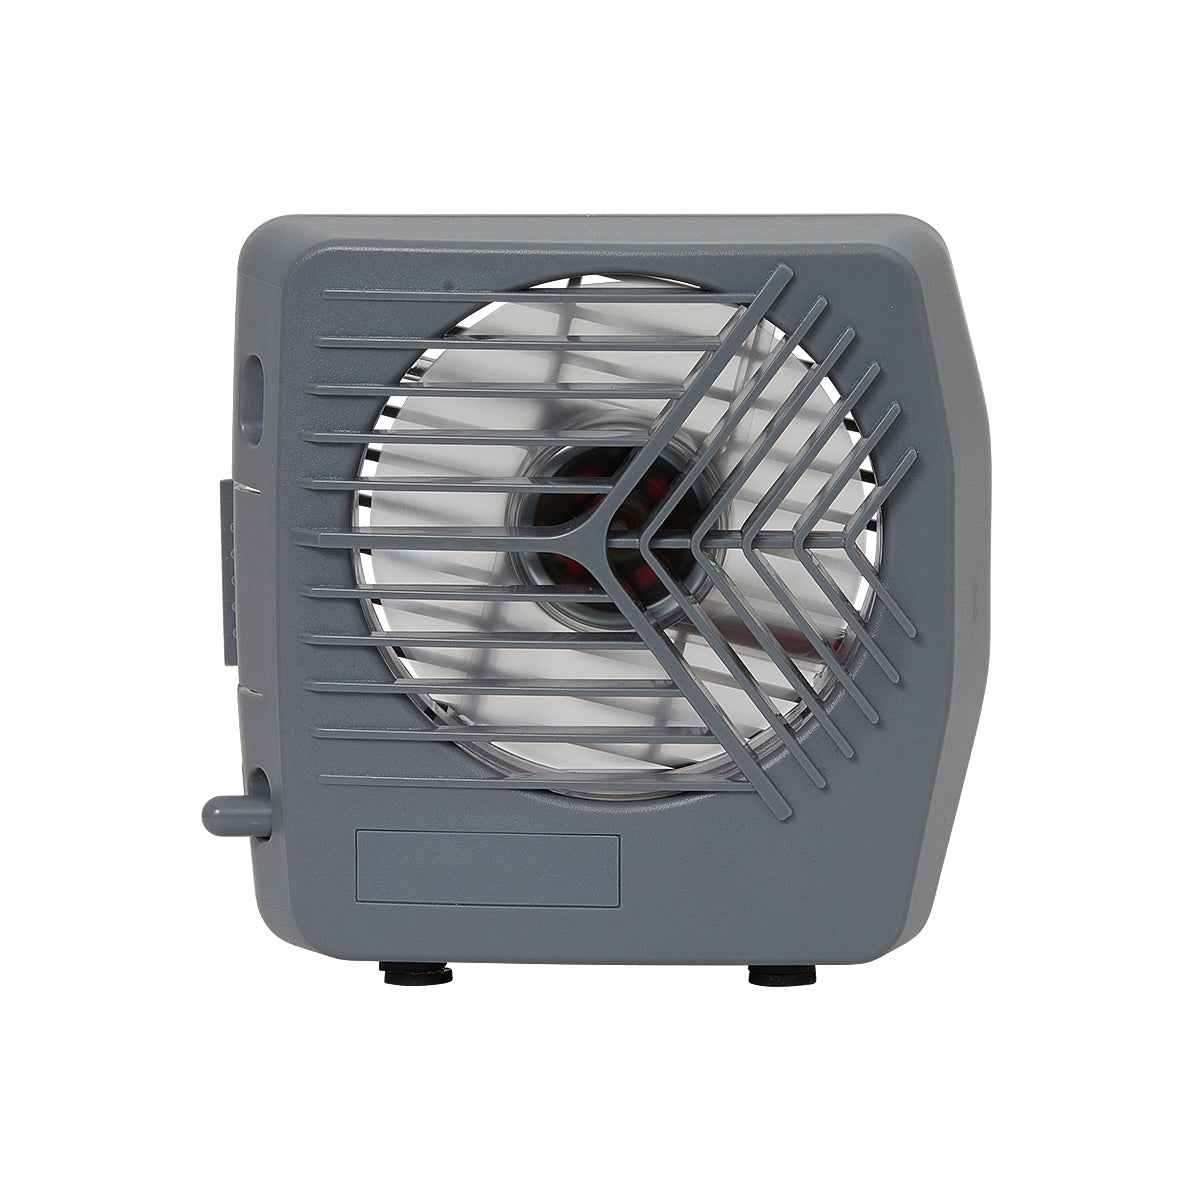 DUOREST D-Type Cooling Duorest Ergonomic Chair Seat Fan (for D2, D2A, ALPHA RENEW, GOLD, Q1SP, Q5, Q7, D3) - D-TYPE-FAN